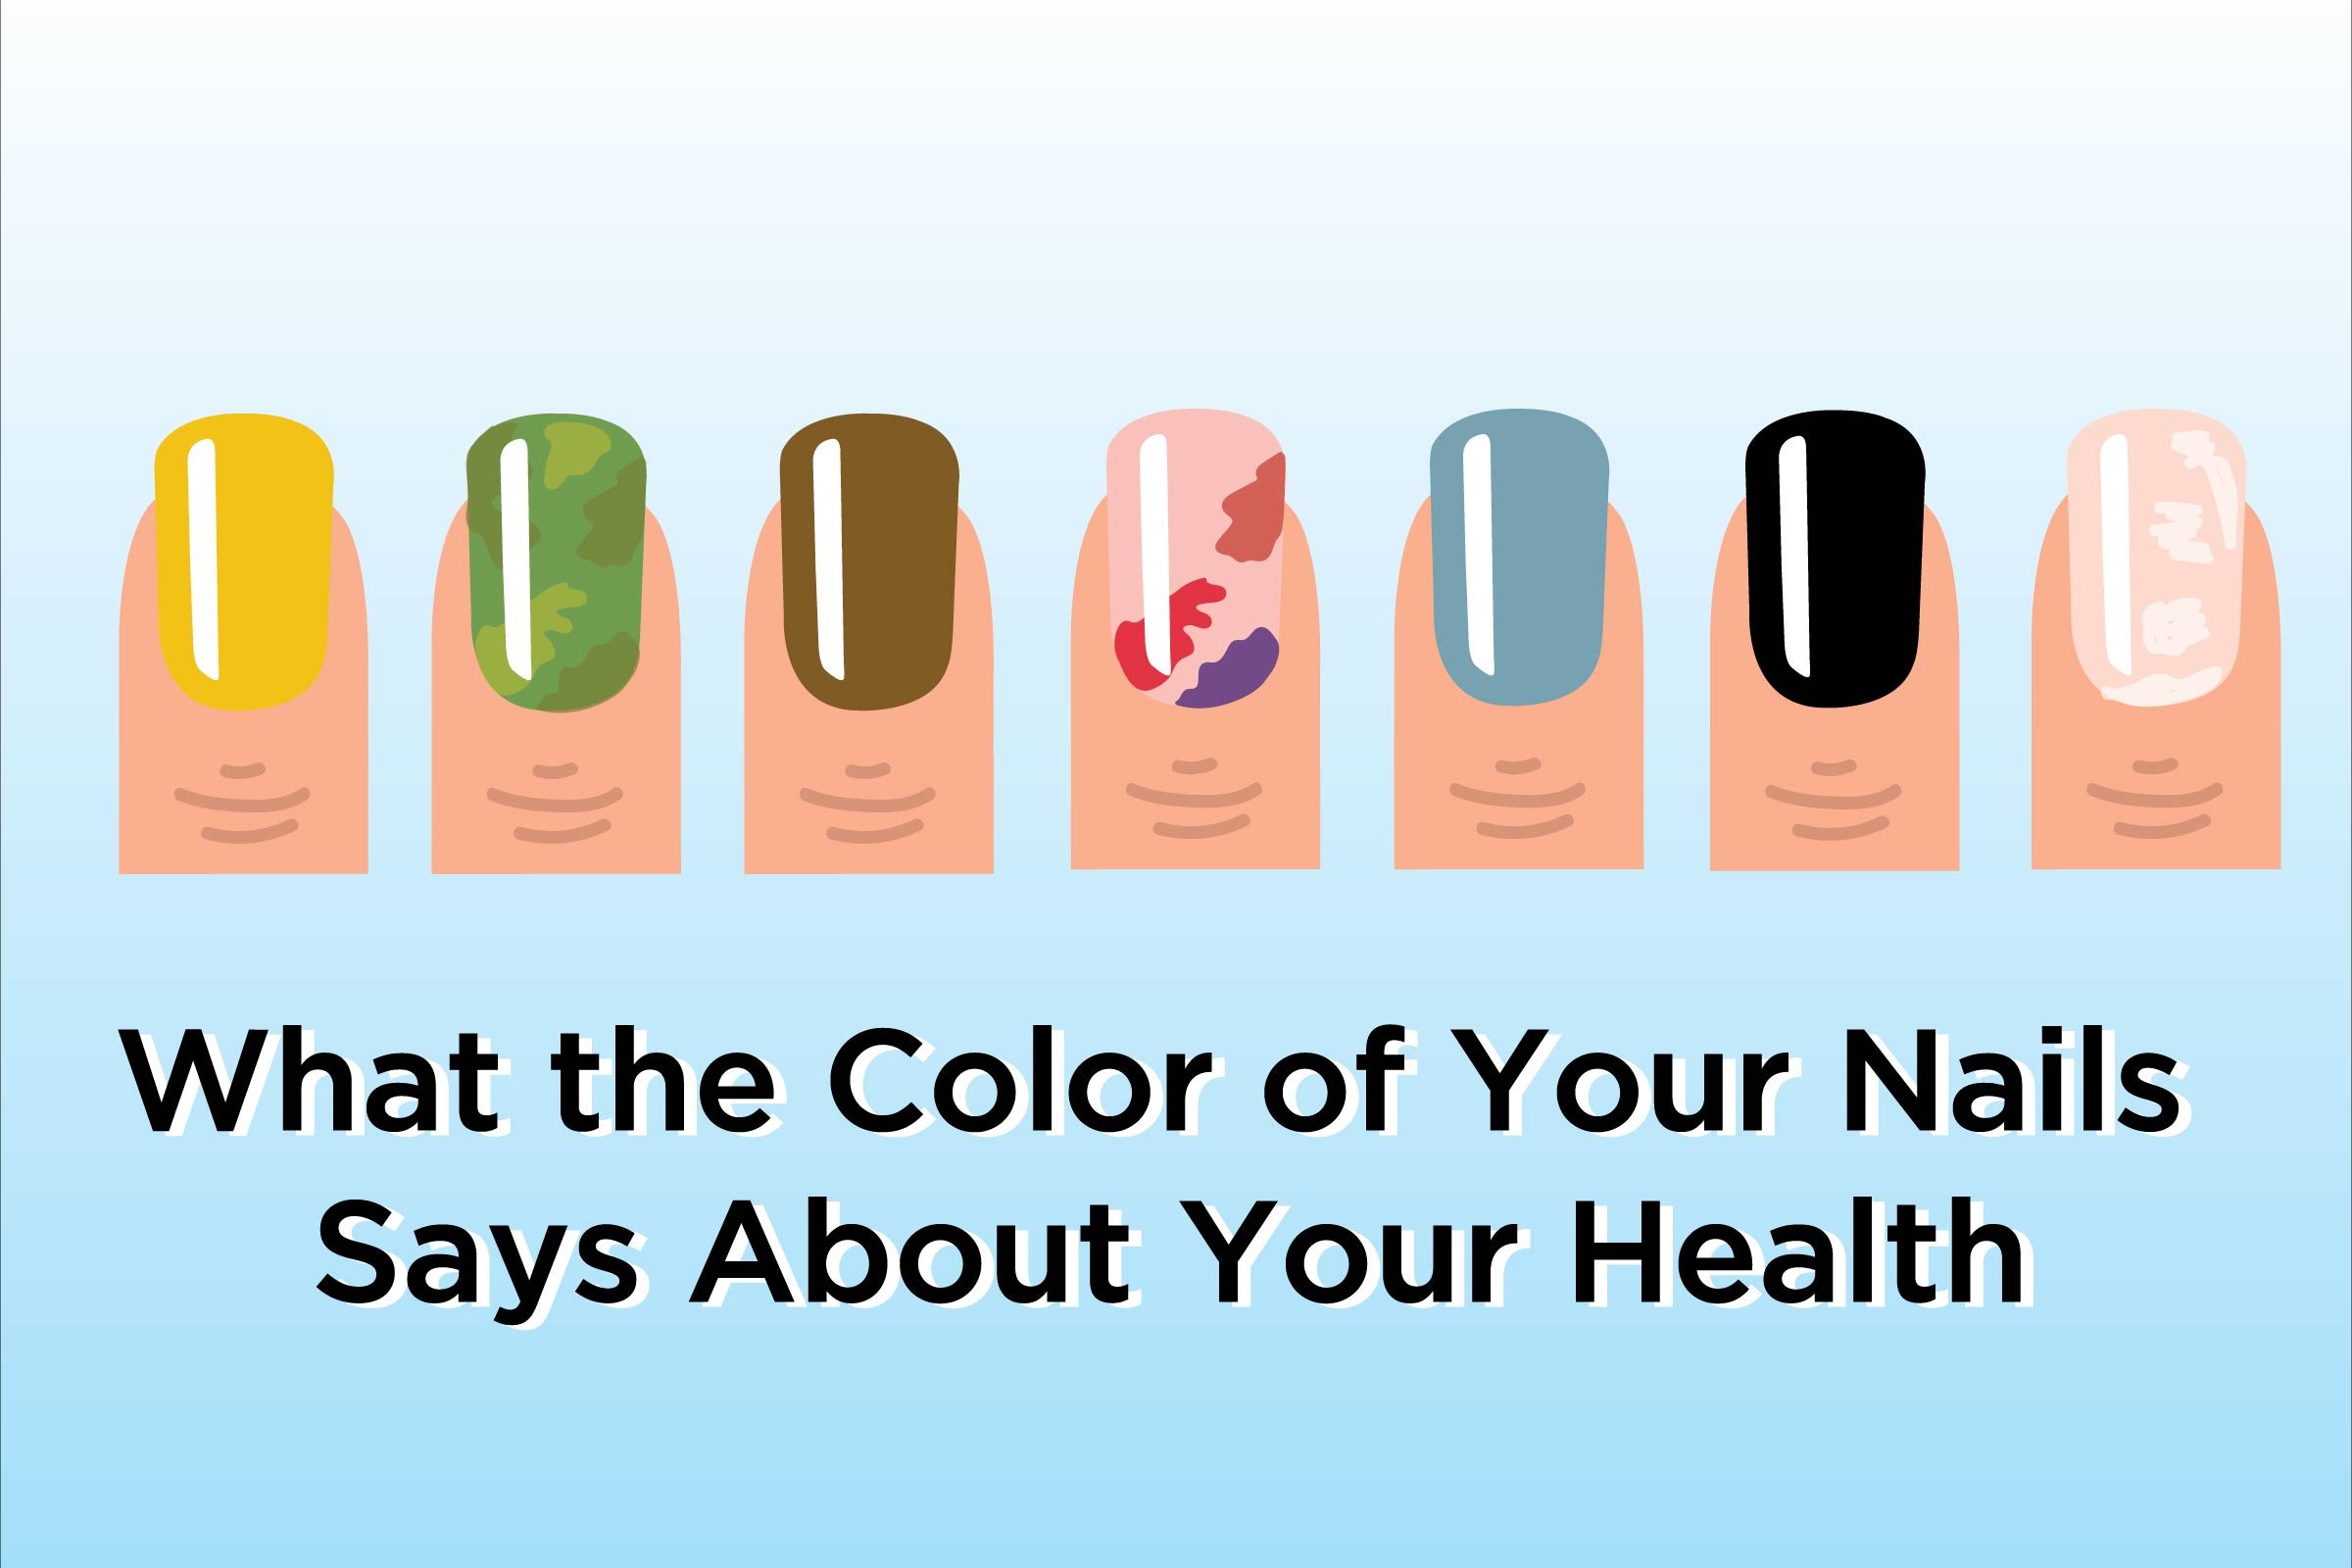 8. The Role of Genetics in Nail Color and Health - wide 5